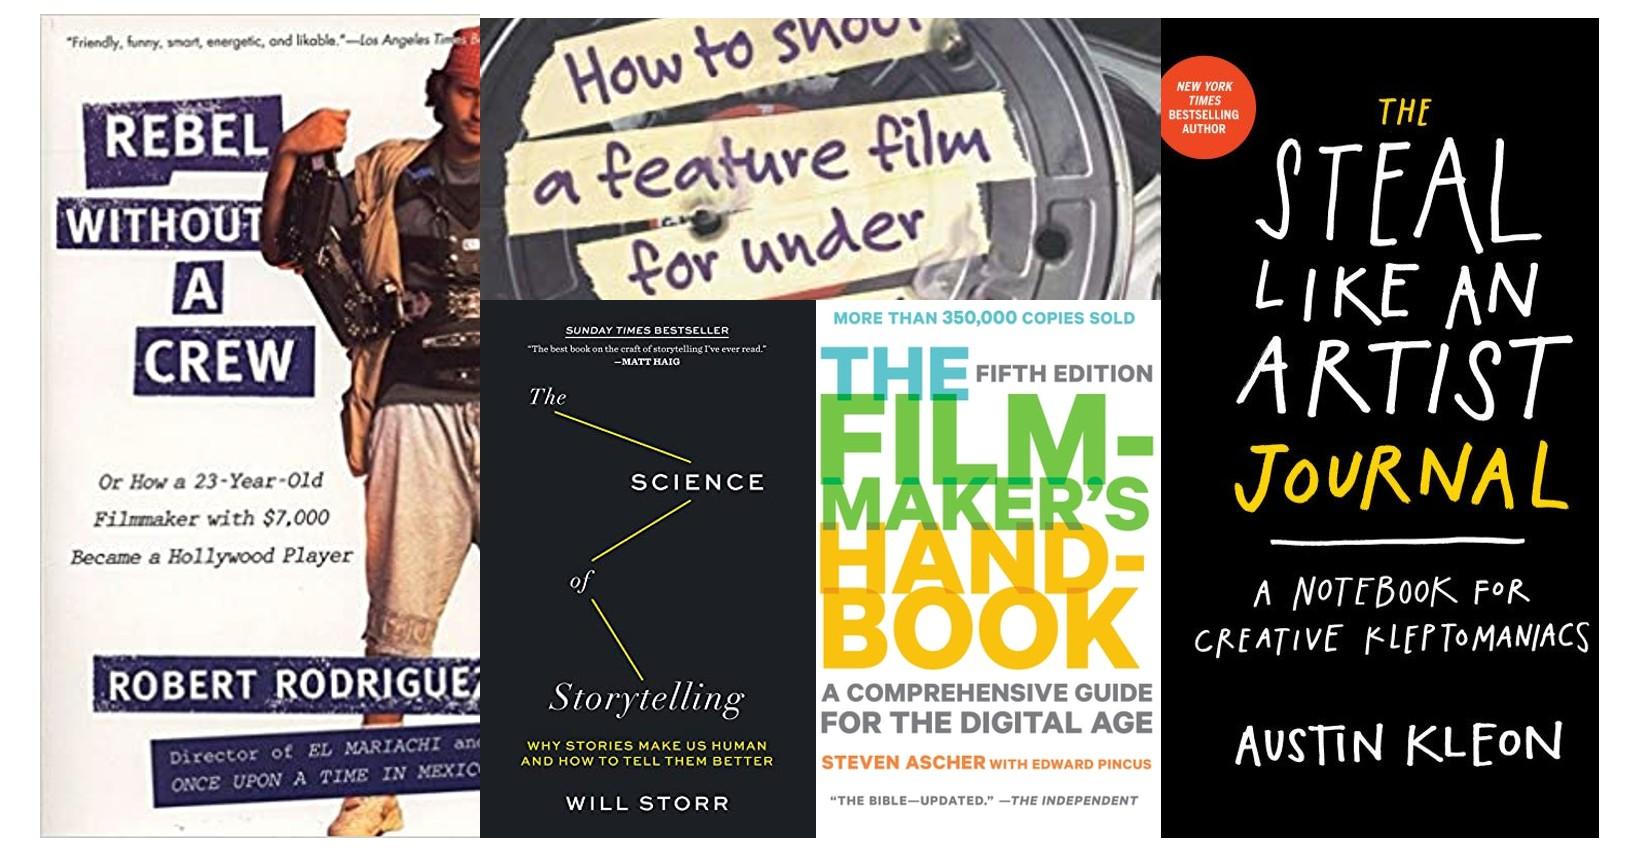 16 of the Best Filmmaking Books to Elevate Your Skills